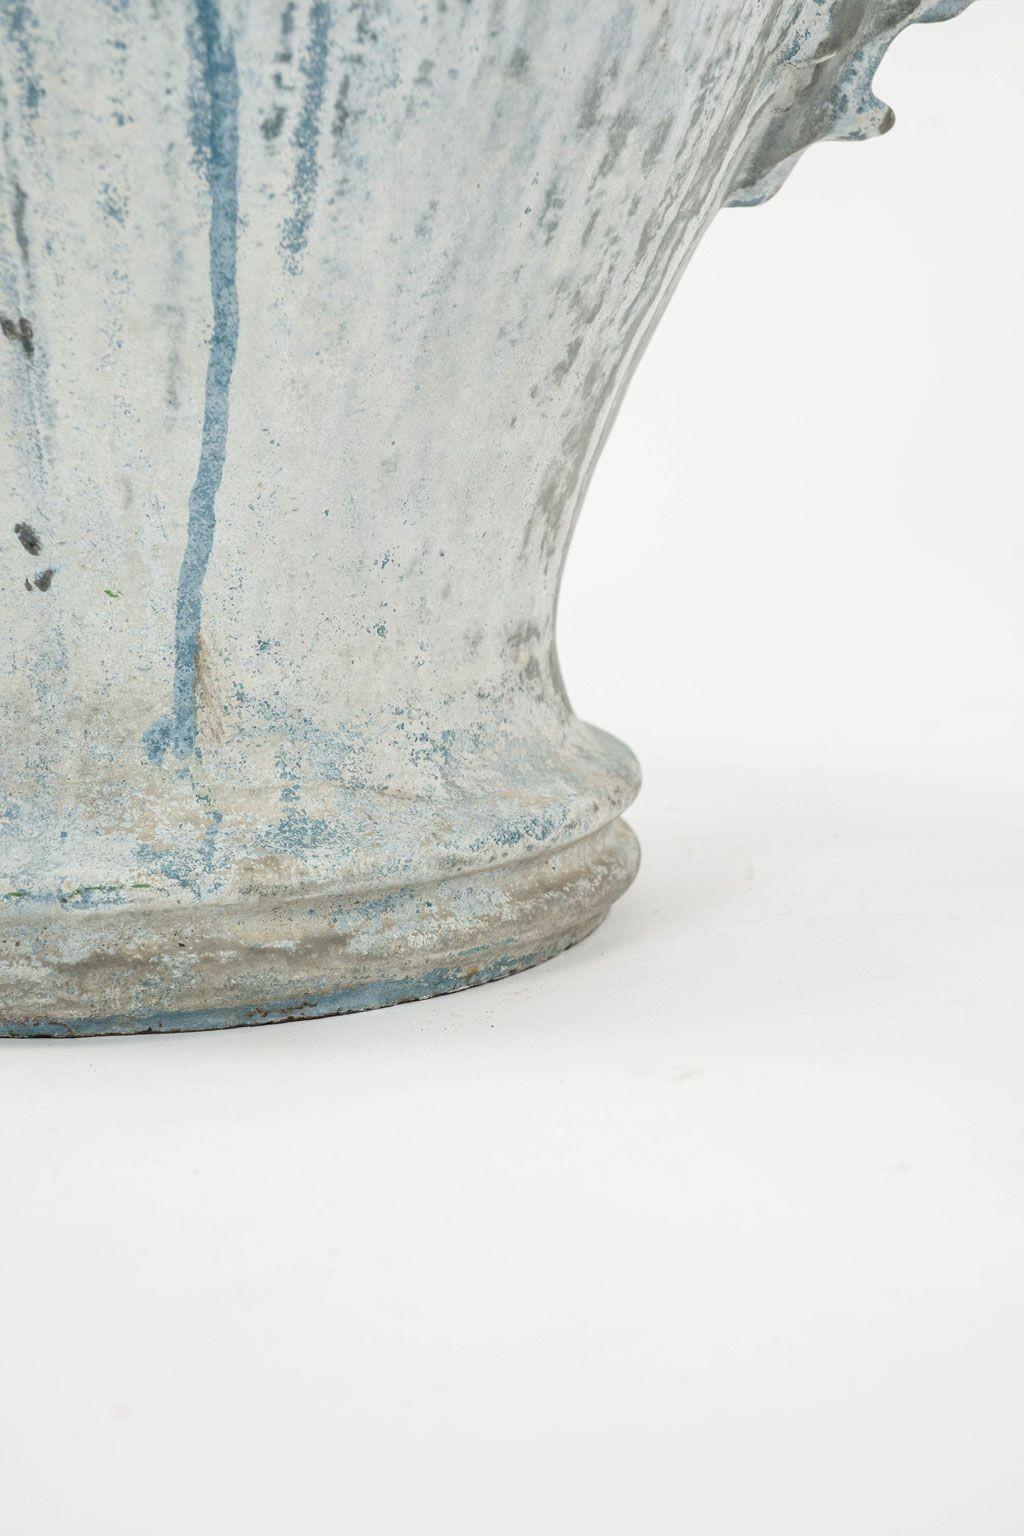 Late 19th Century Faded Blue-Color Enamel Cast Iron Urn For Sale 6